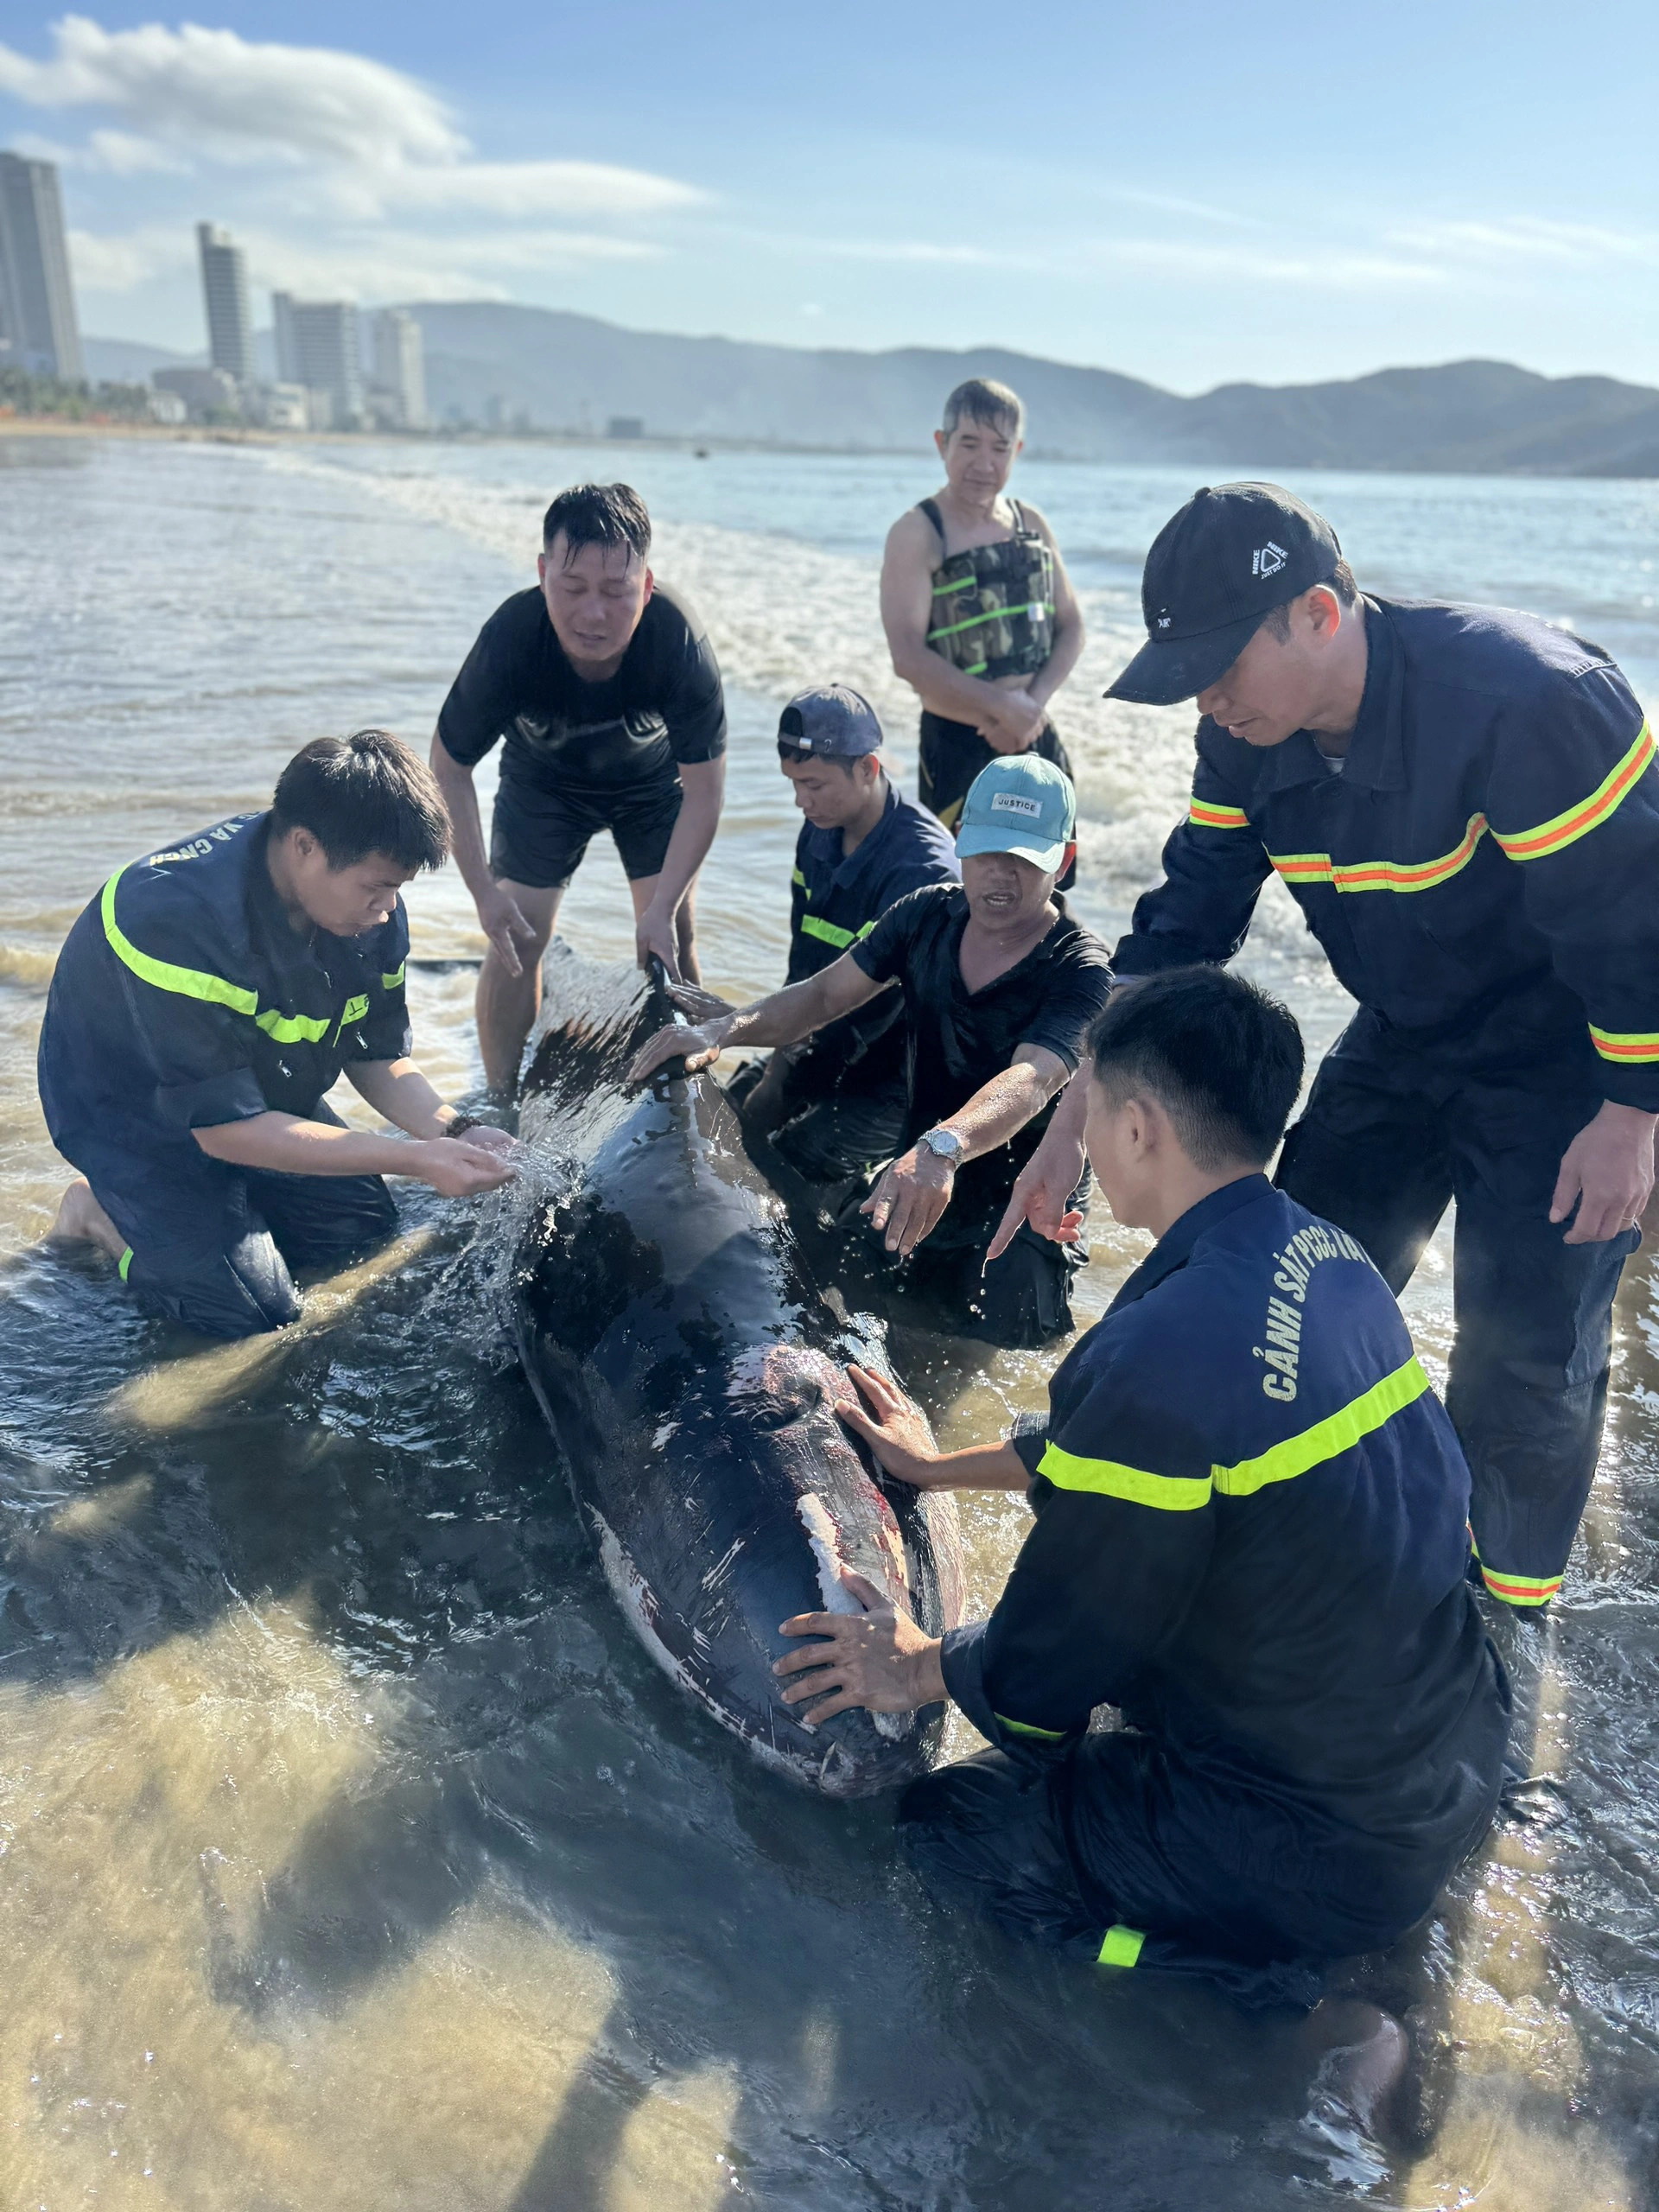 Rescuers and local residents provide the injured, stranded whale with basic treatment. Photo: N.H.T.